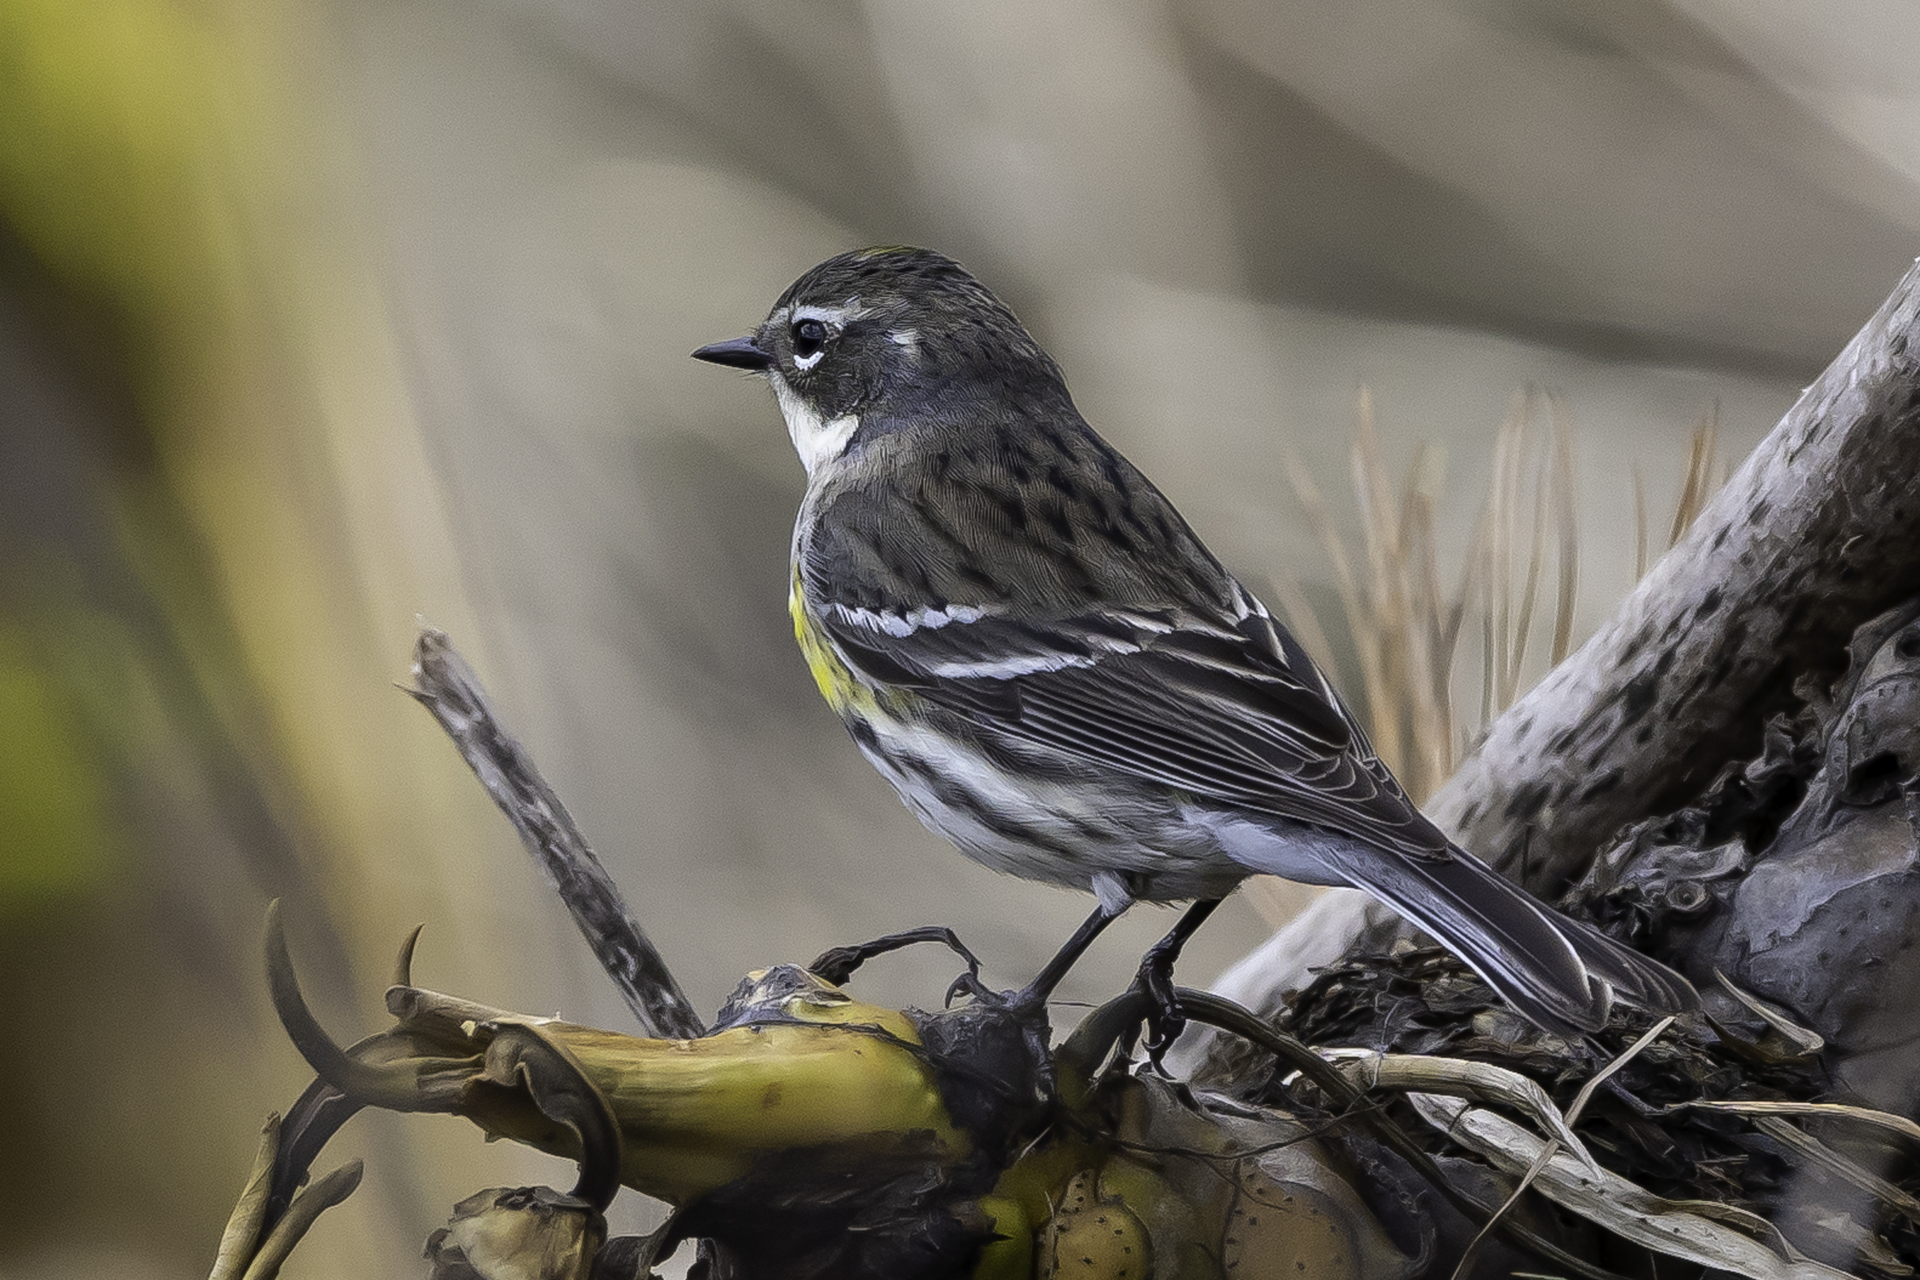 Yellow-rumped Warbler on a stick, facing away from the camera.